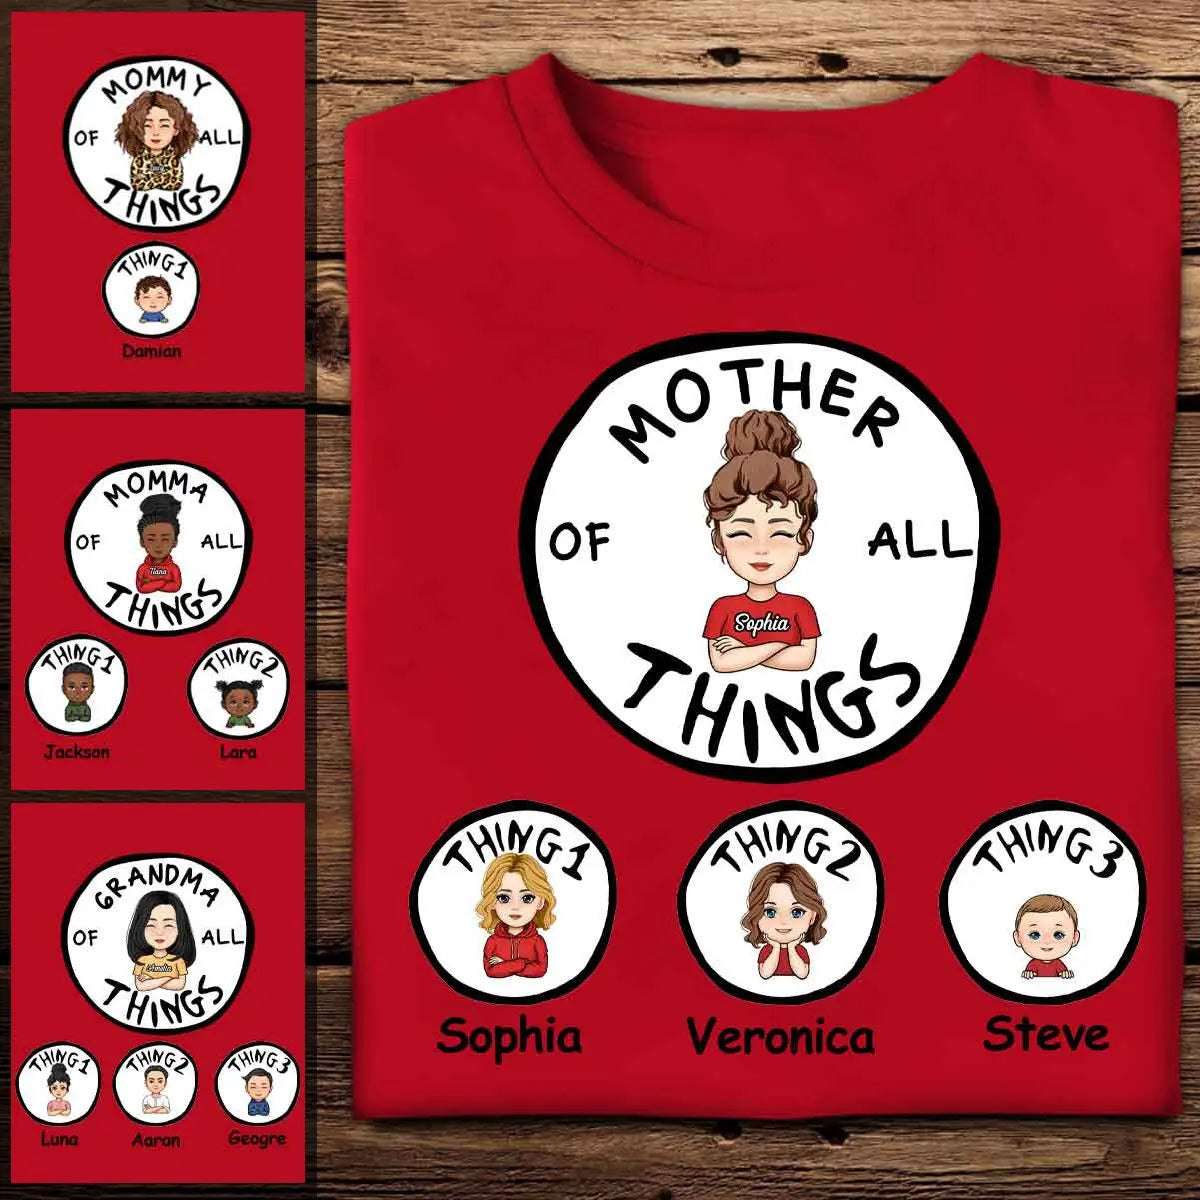 Family - Mother Of All Things - Personalized Shirt